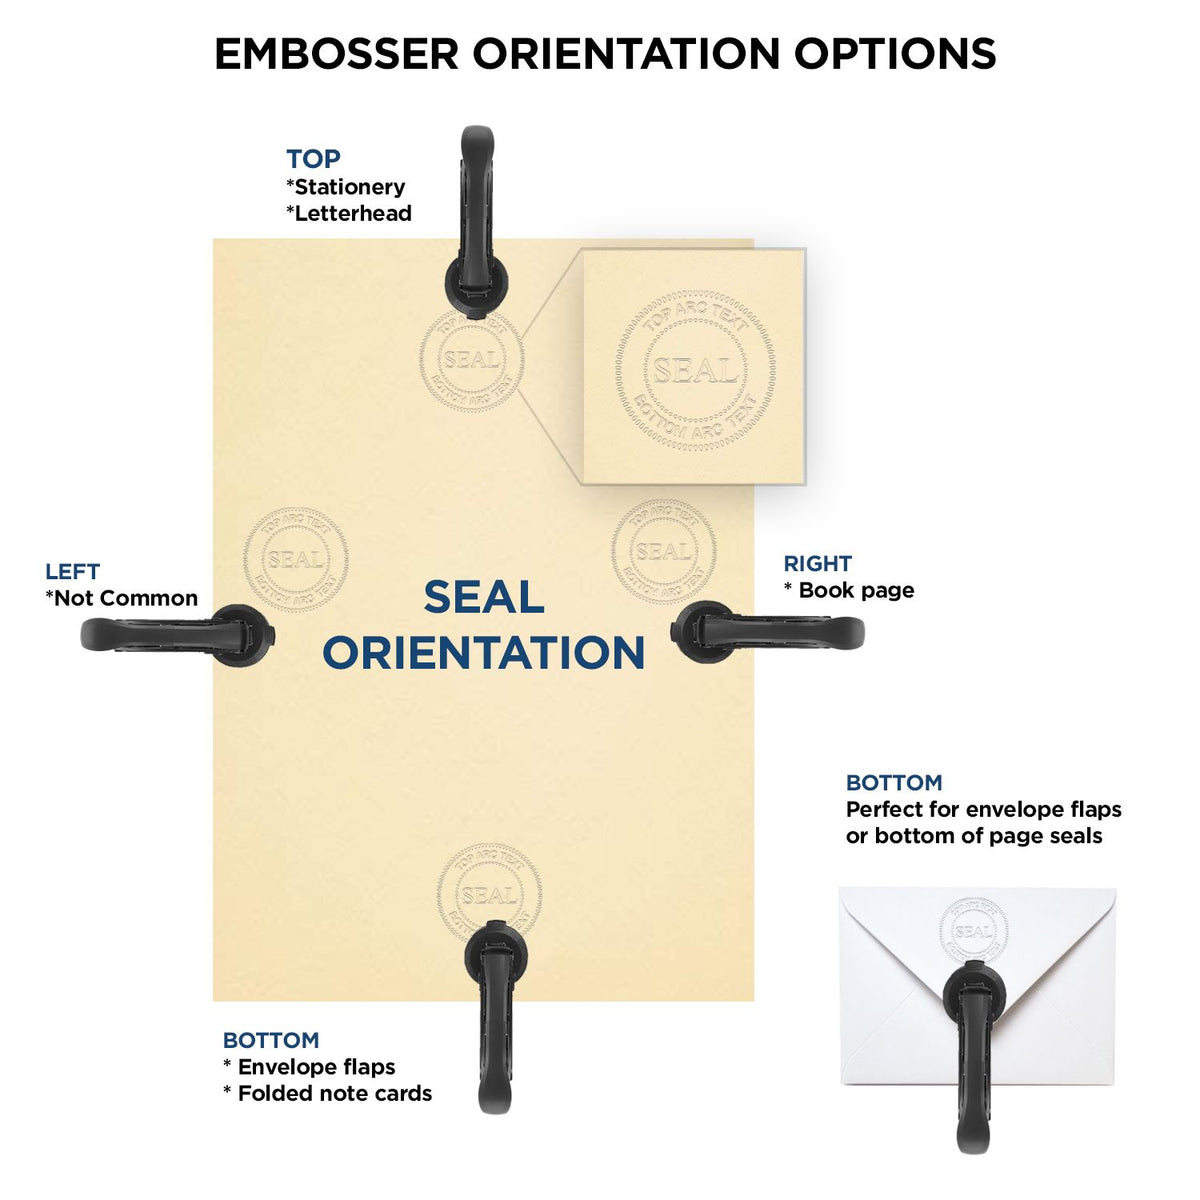 An infographic for the Heavy Duty Cast Iron New Jersey Engineer Seal Embosser showing embosser orientation, this is showing examples of a top, bottom, right and left insert.